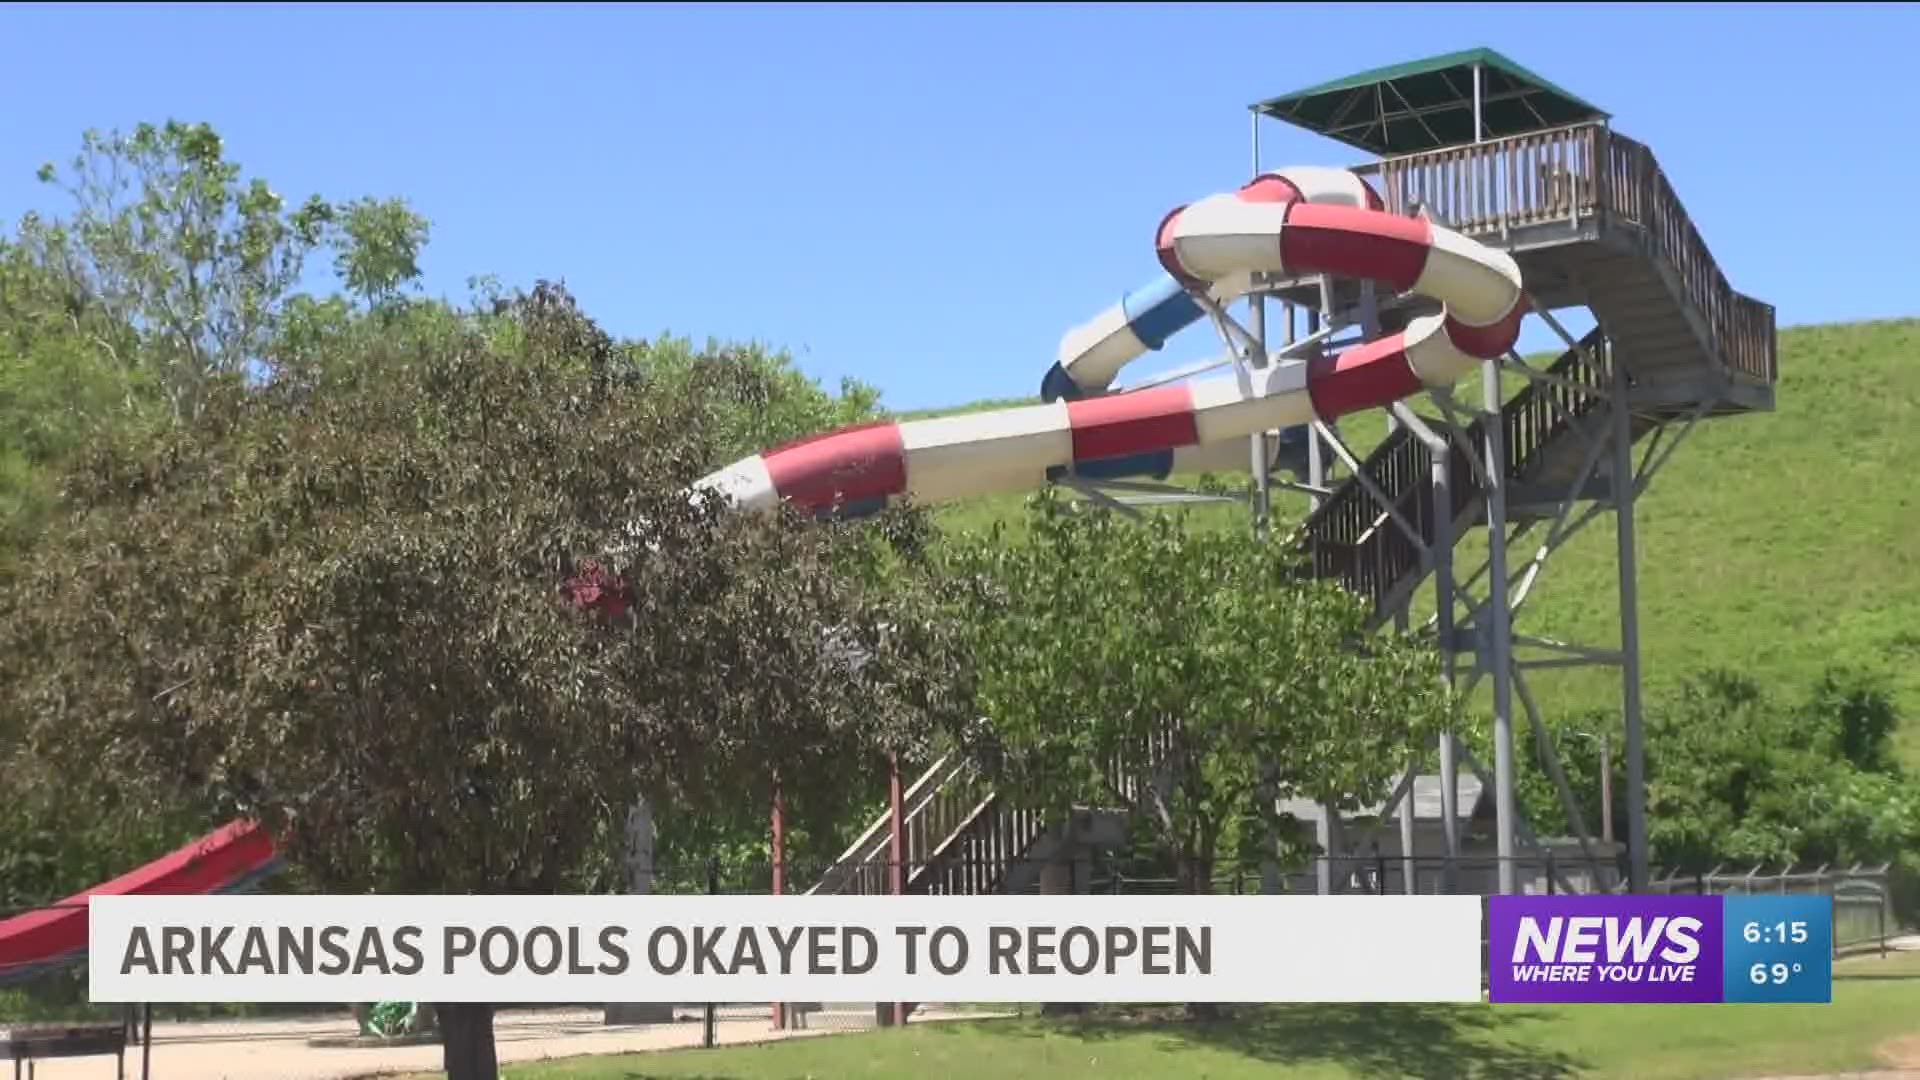 Monday (May 18) is the day public pools and water parks can reopen their doors to the public in Arkansas, with strict sanitation and social distancing guidelines.